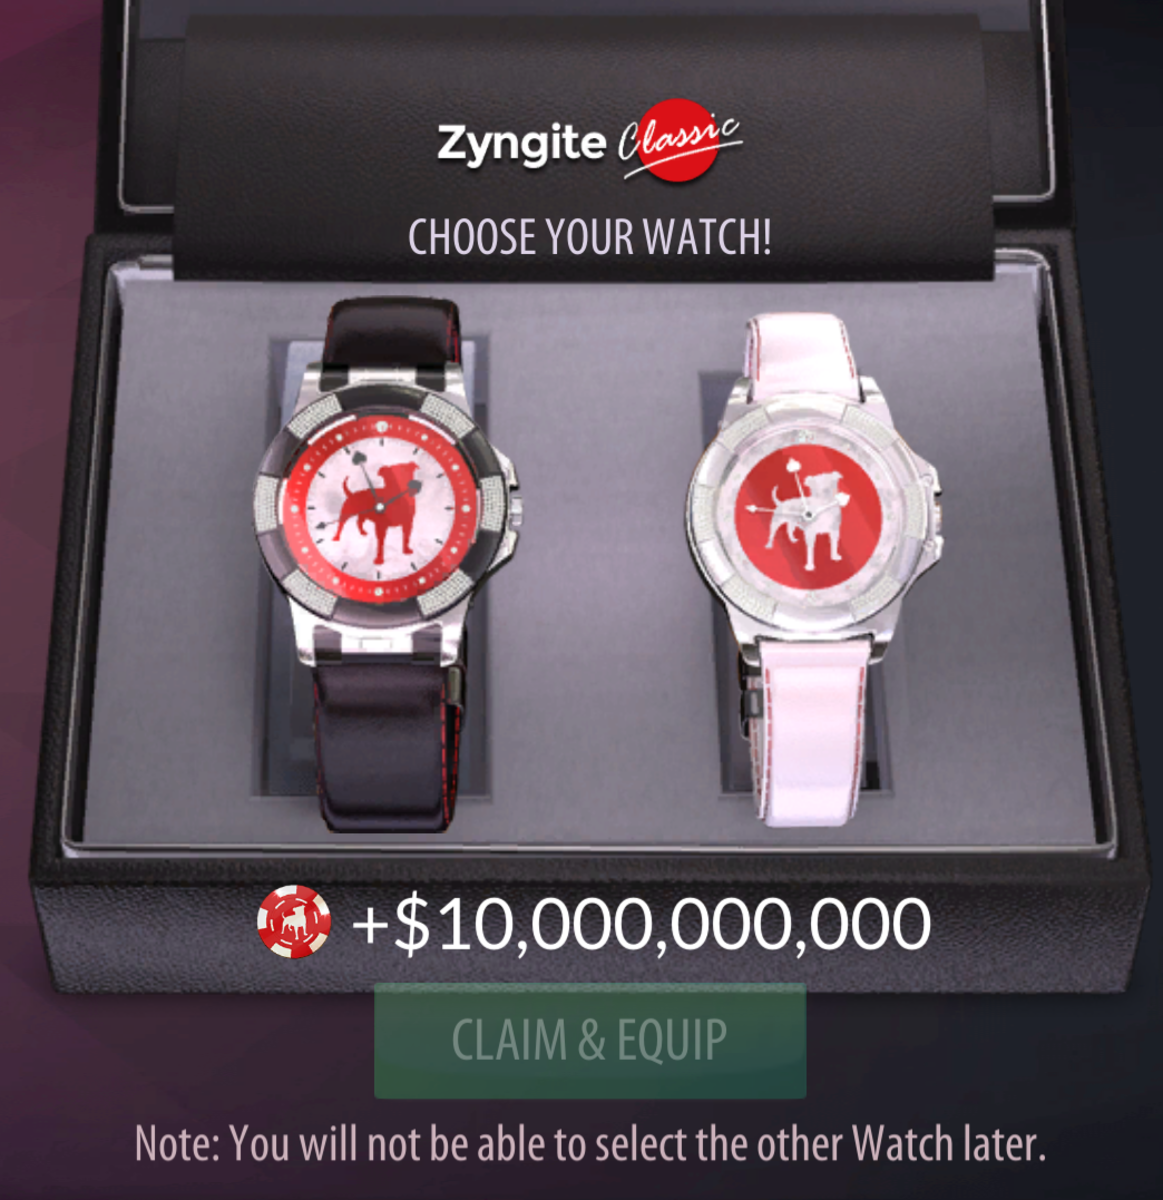 The first poker watch.